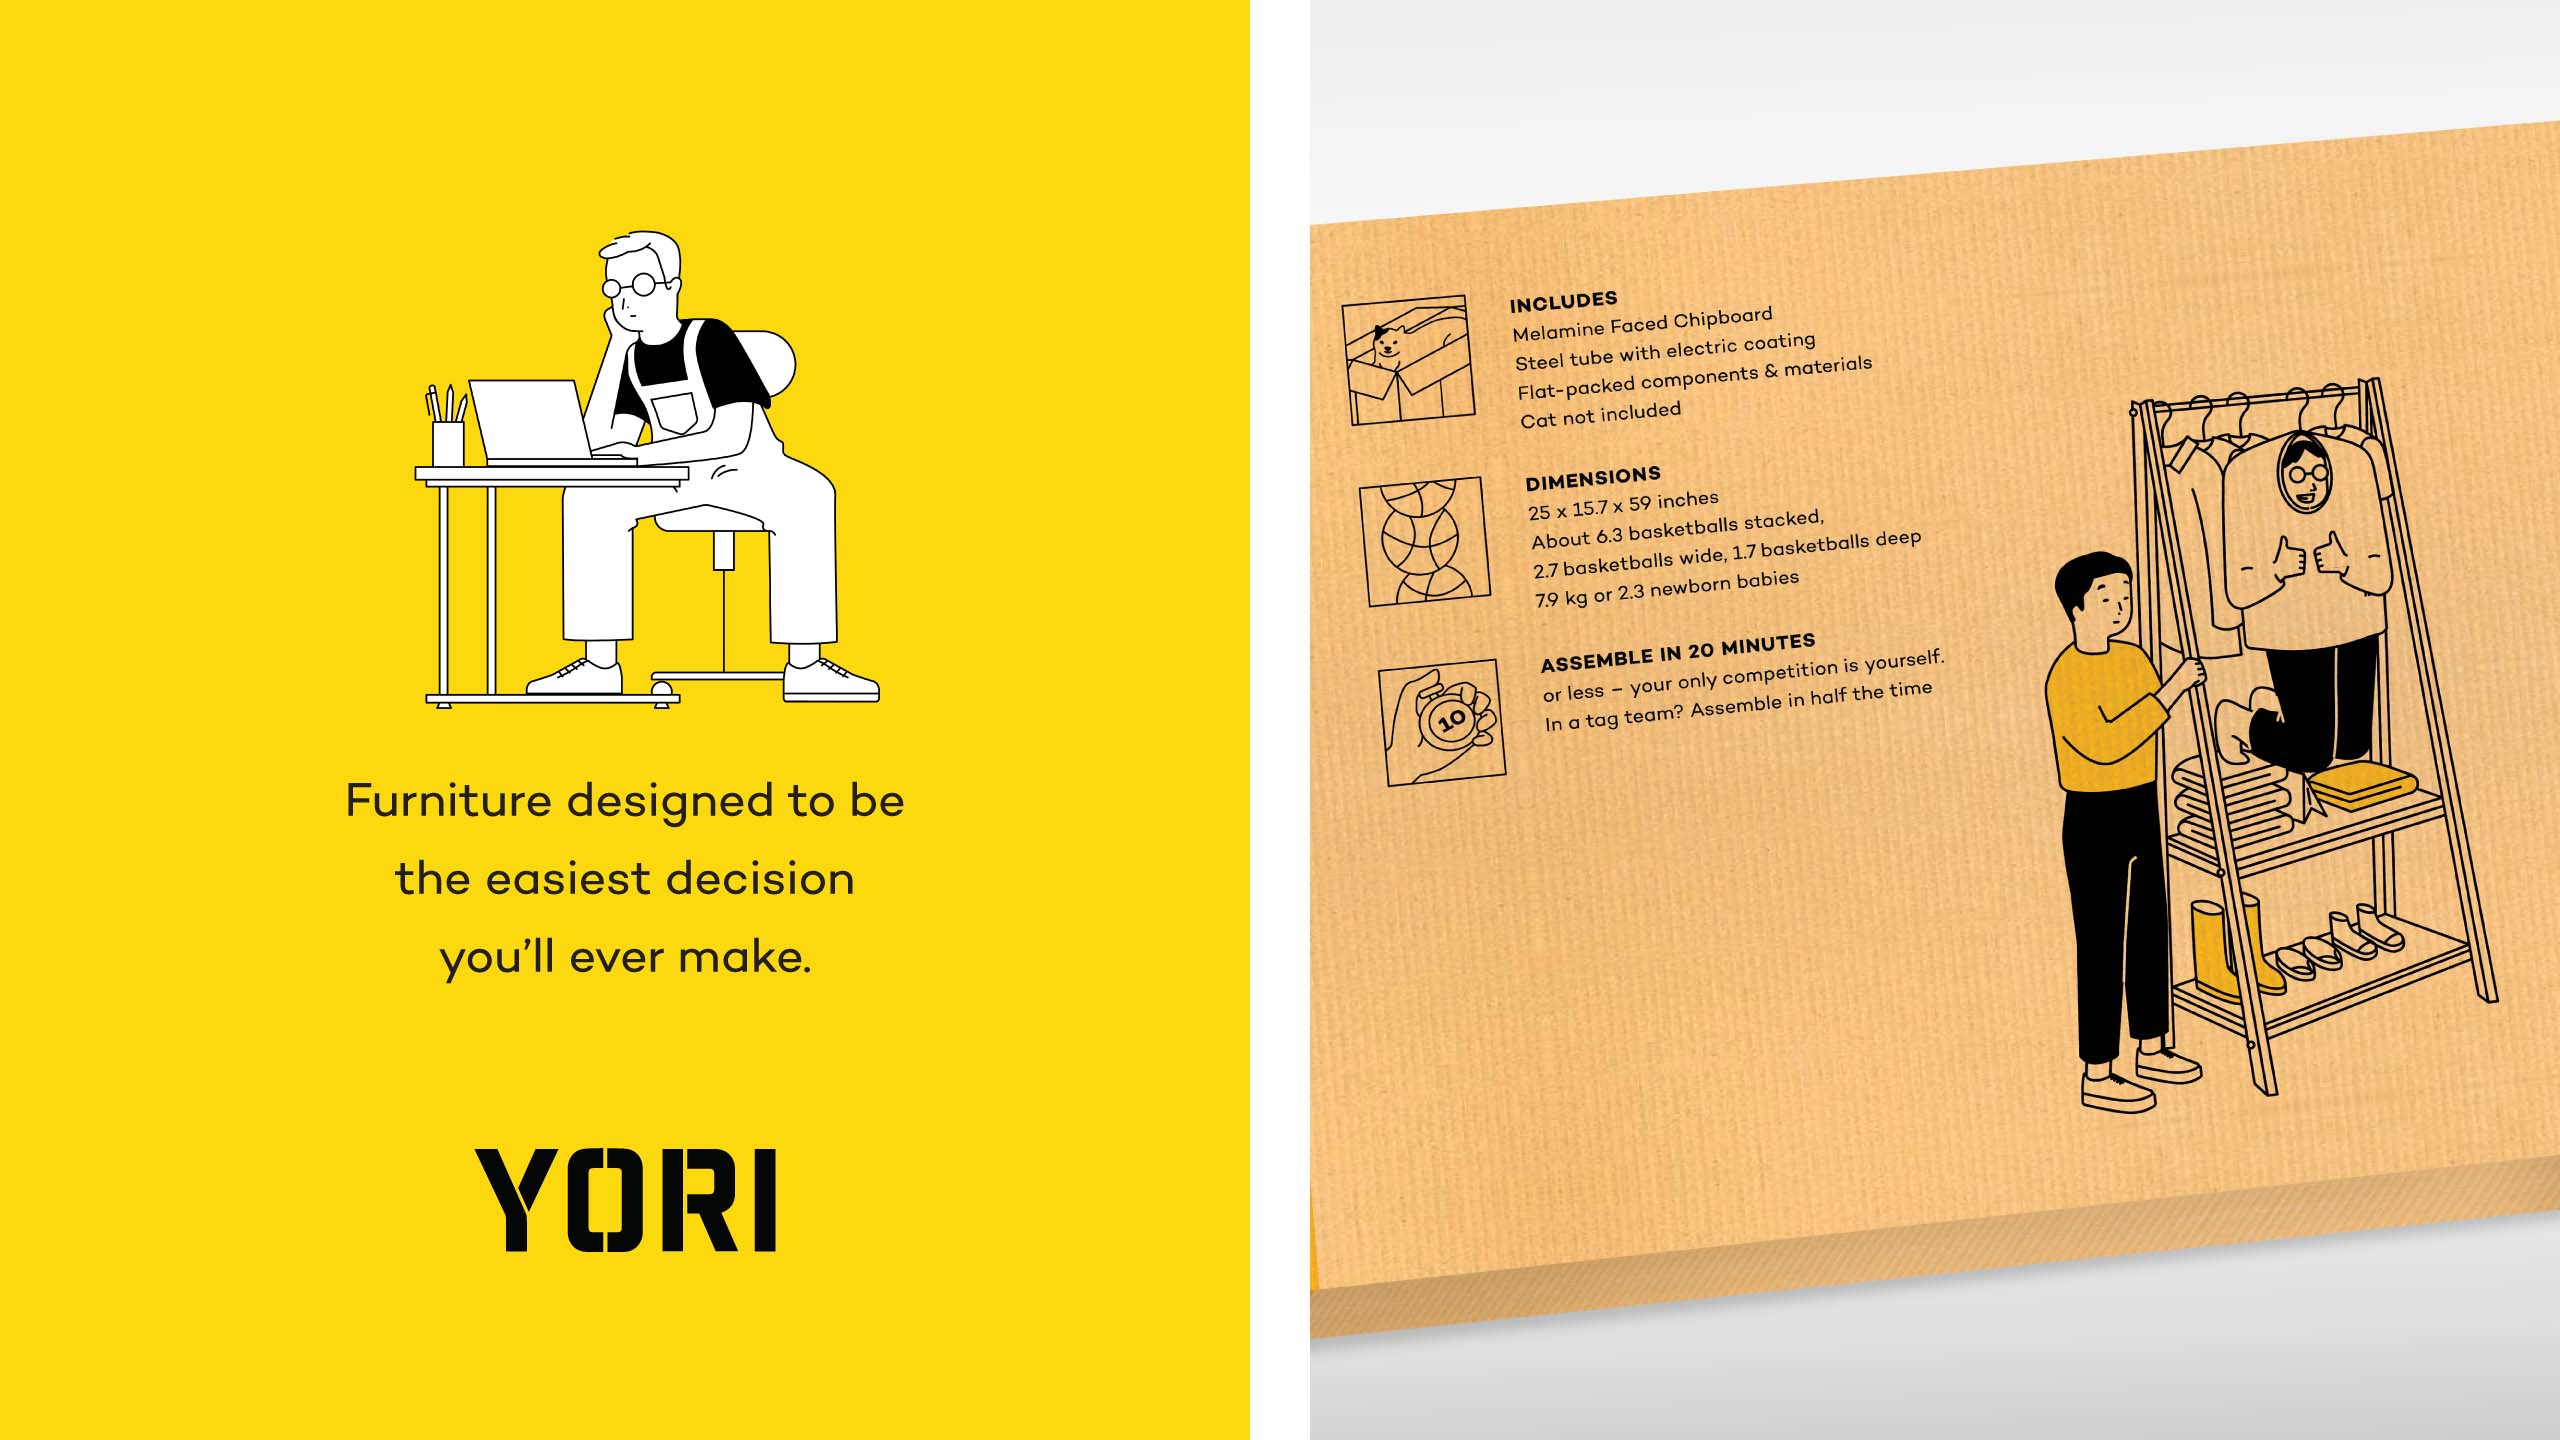 Furniture brand Yori's fun and witty illustrations applied on packaging details and posters